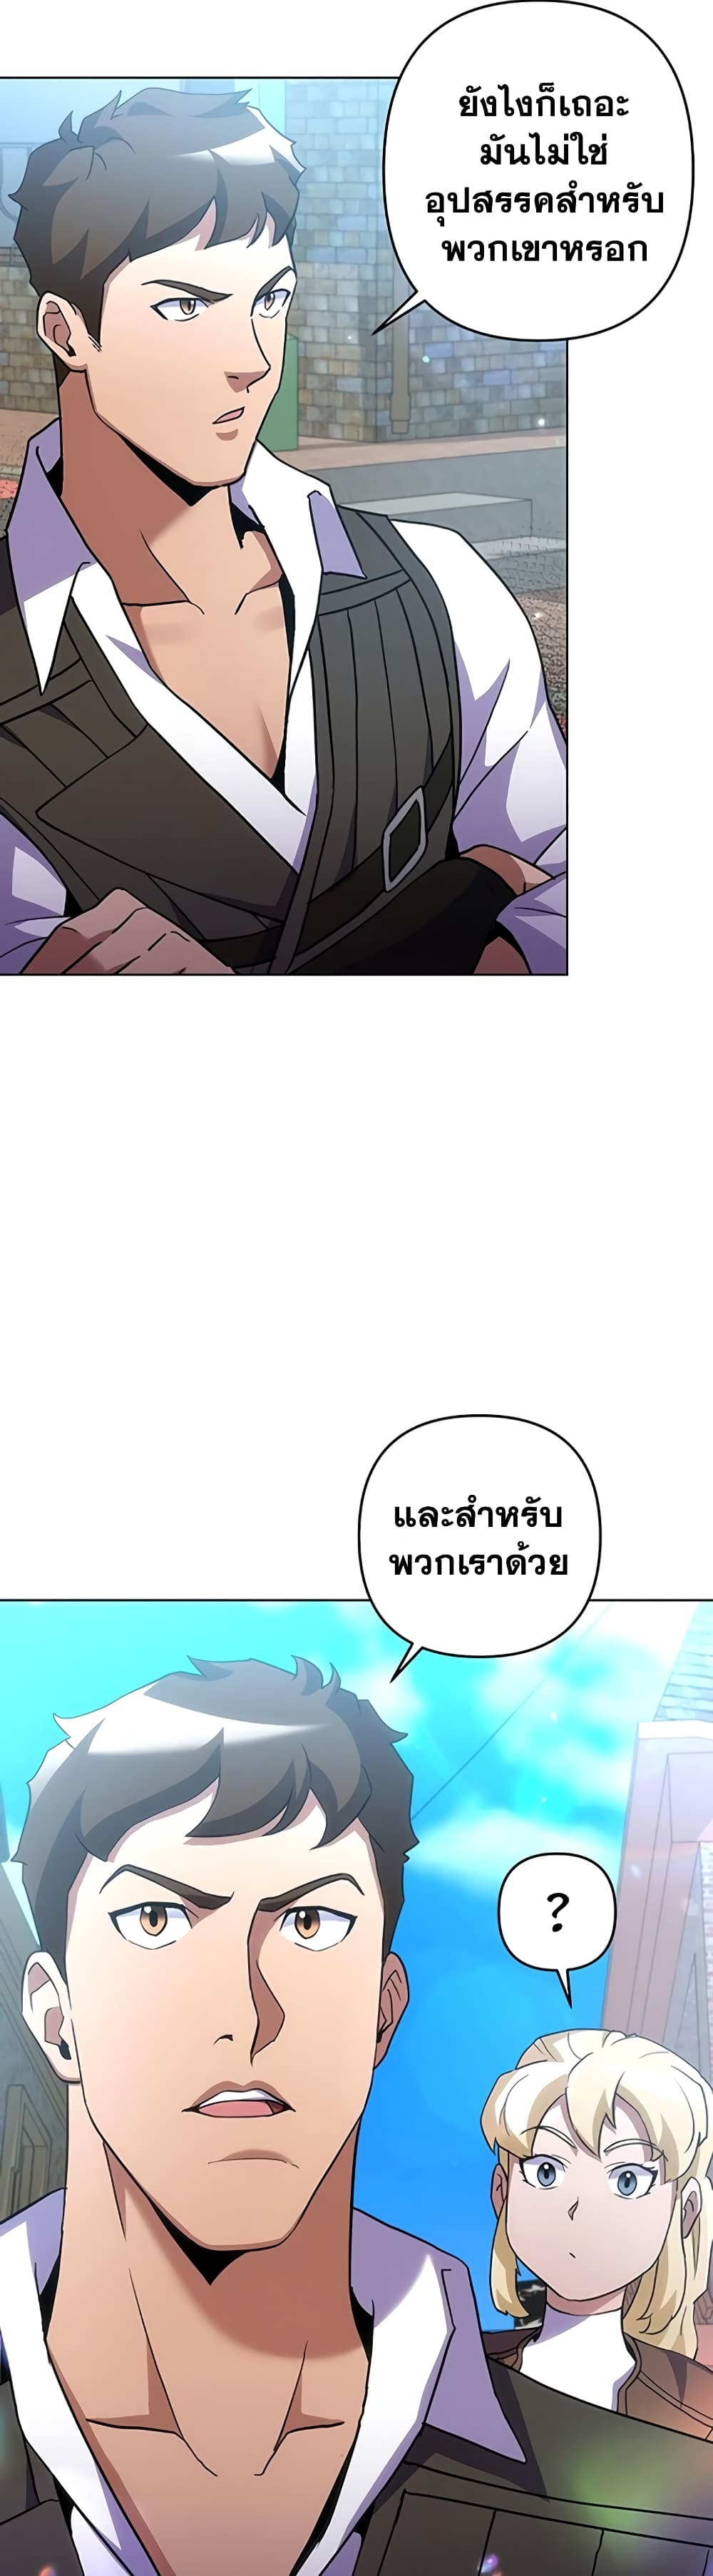 Surviving in an Action Manhwa 18 08